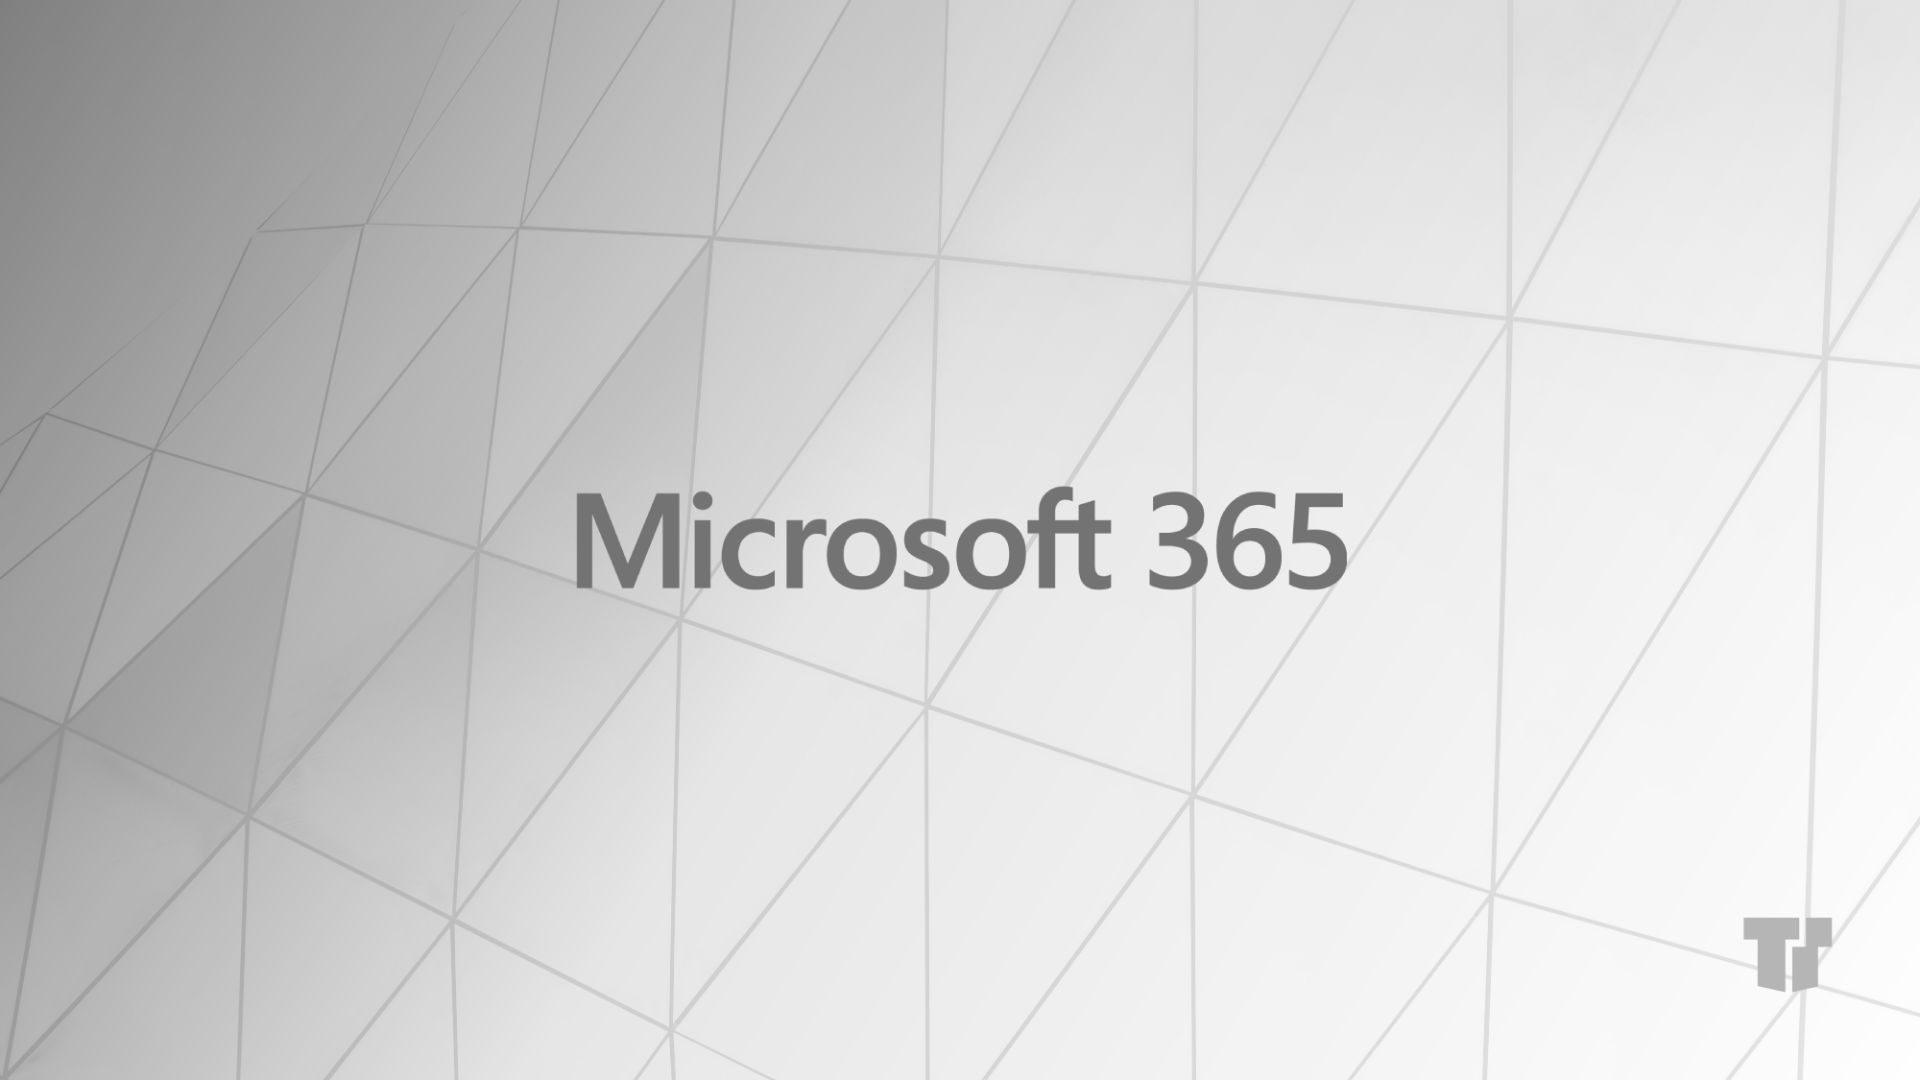 Most Office 365 Products Will Be Renamed To 